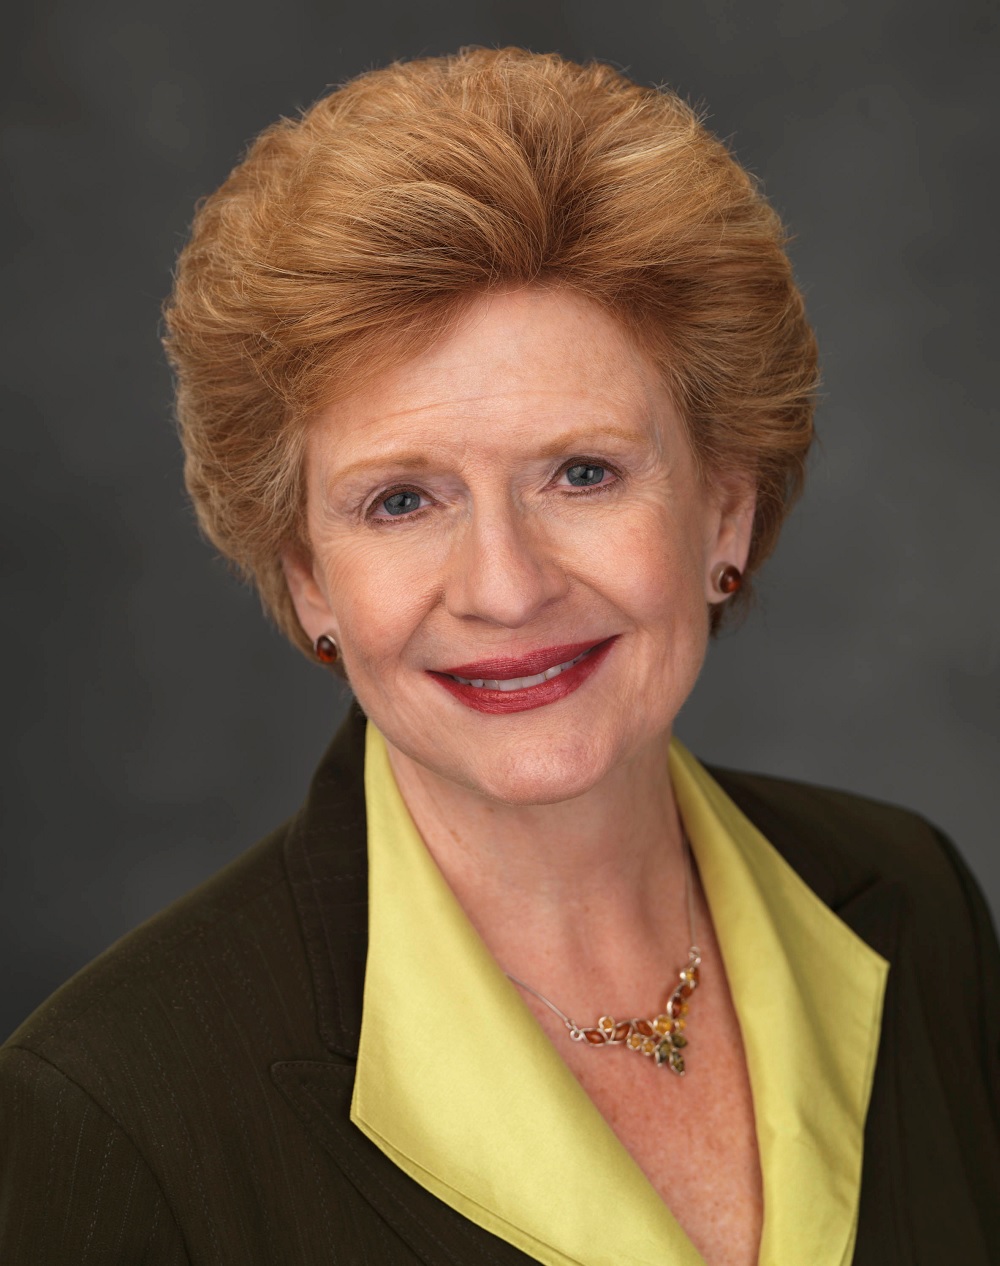 Ranking Member Stabenow Opening Statement at Hearing on Agriculture Biotechnology